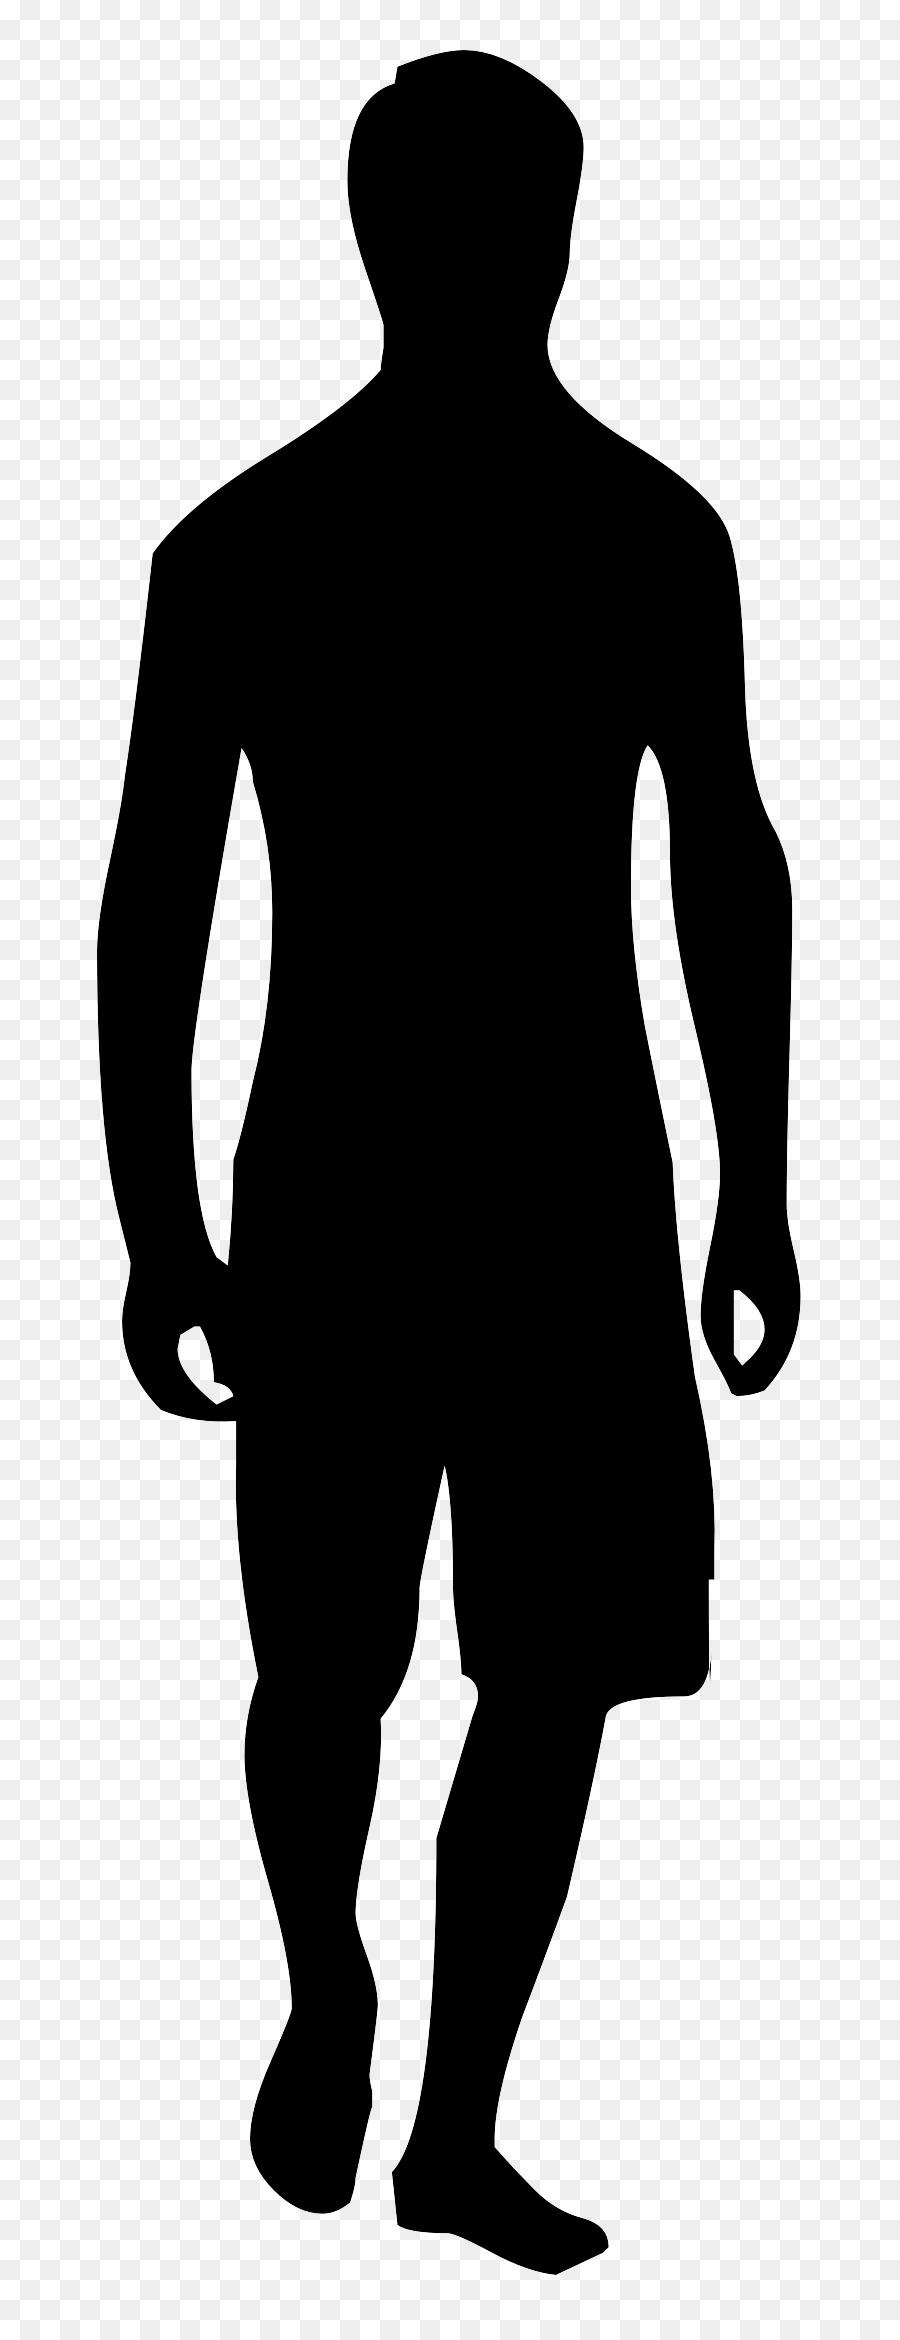 Silhouette - man silhouette png download - 805*2325 - Free Transparent Silhouette png Download.